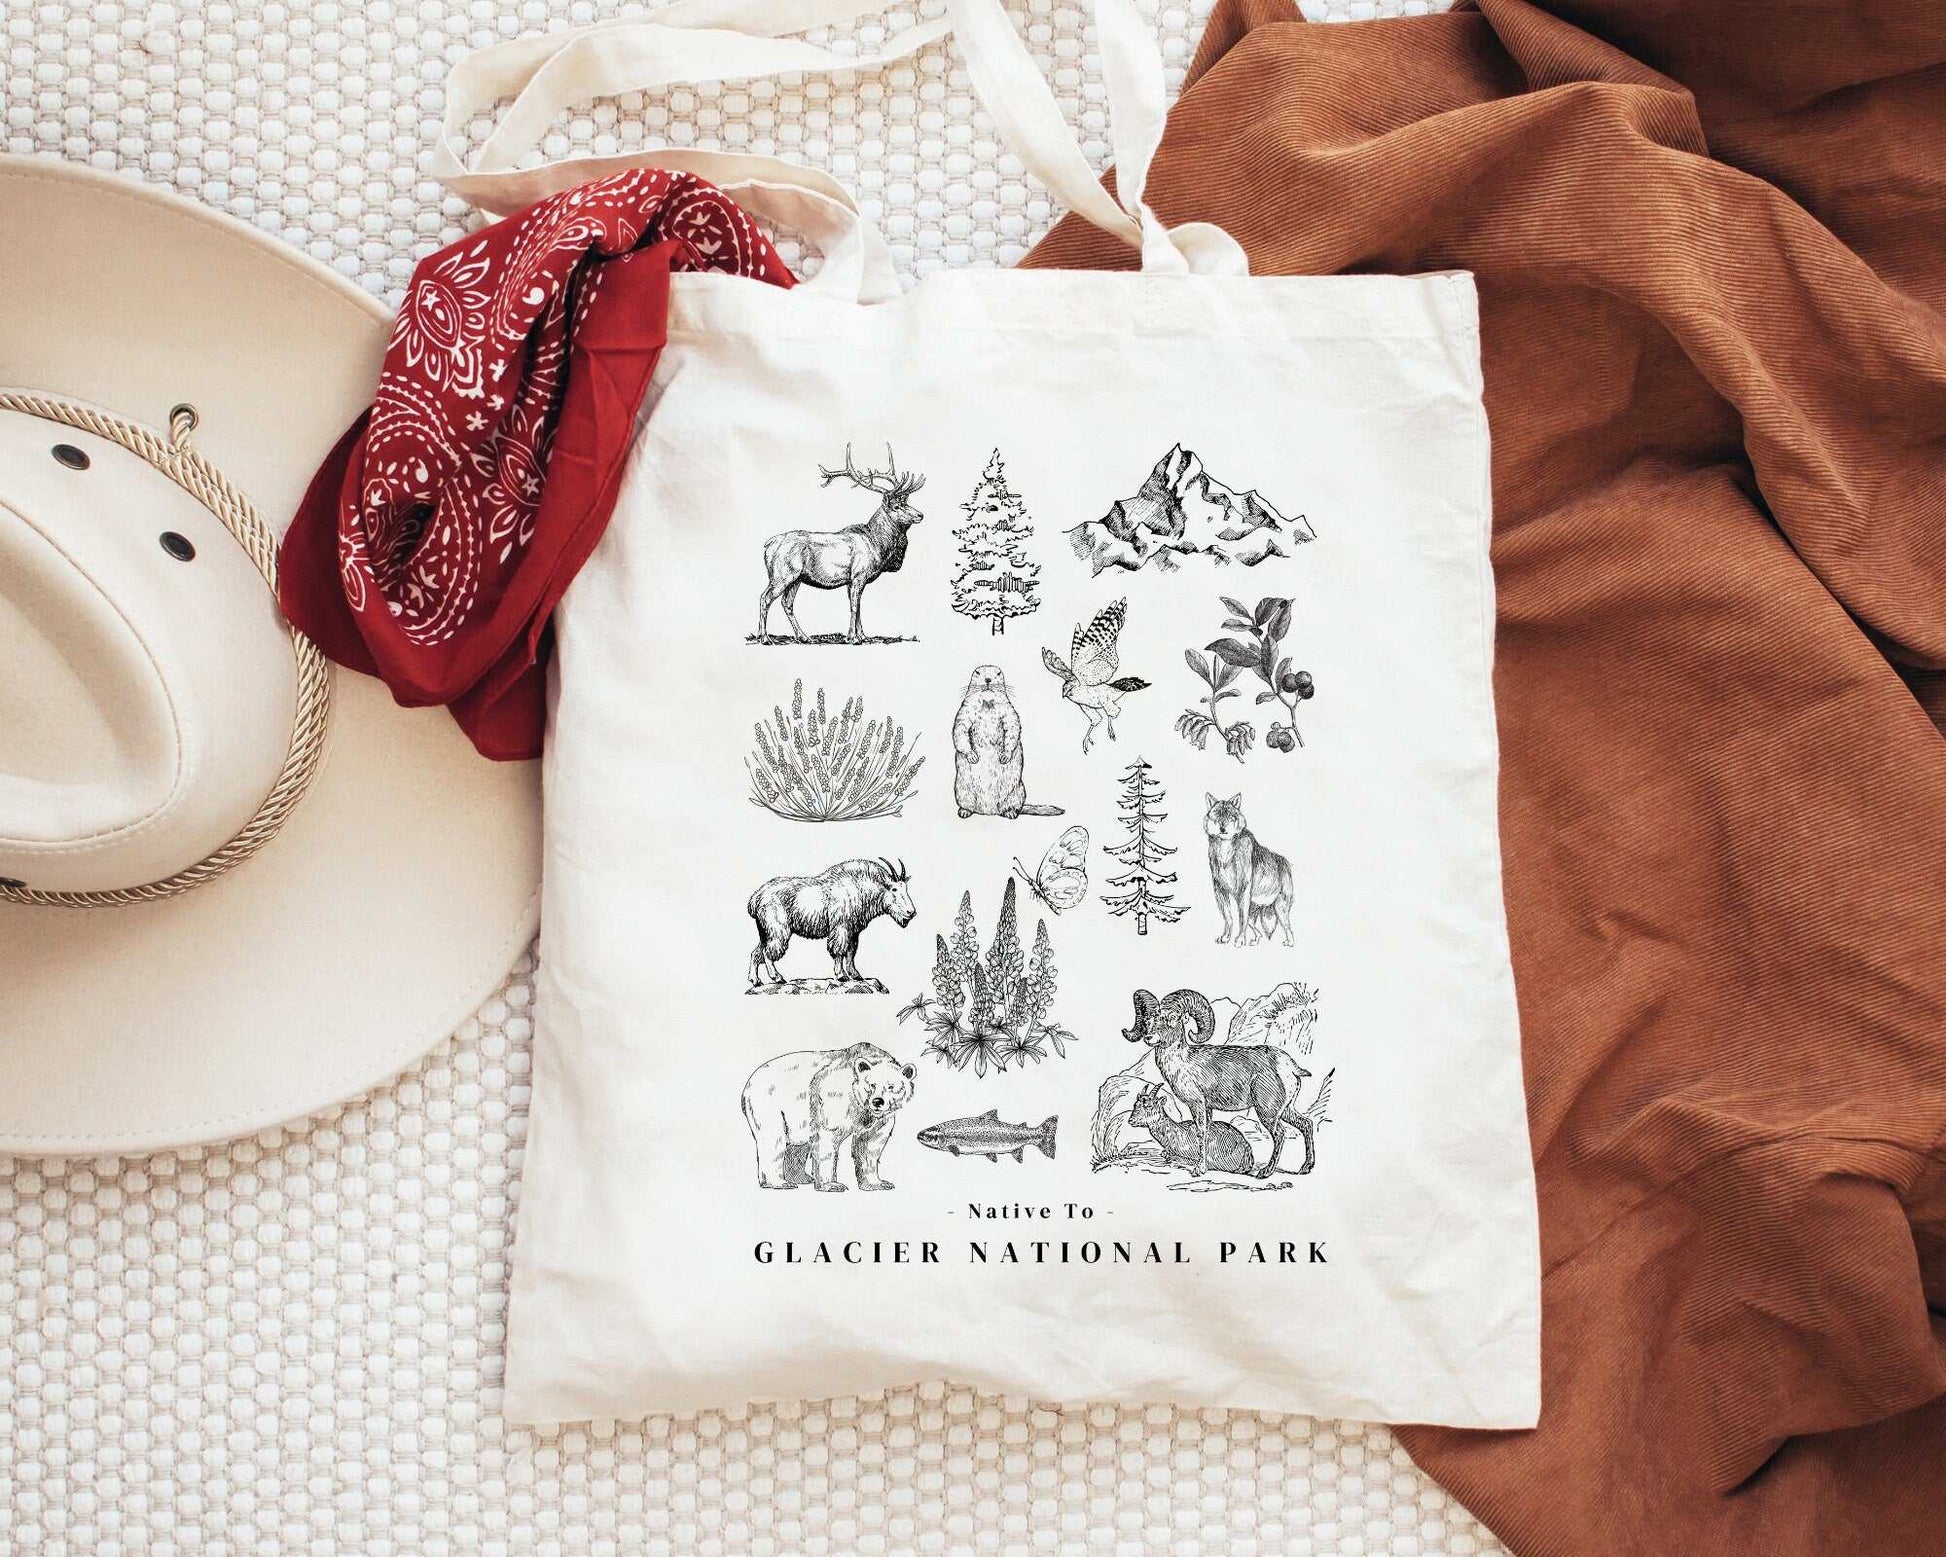 Glacier National Park ToteThese organic cotton tote bags feature the iconic flora and fauna of Glacier National Park in the state of Montana.
Details:
- 15.75"h x 15.25"w - handle length of 2